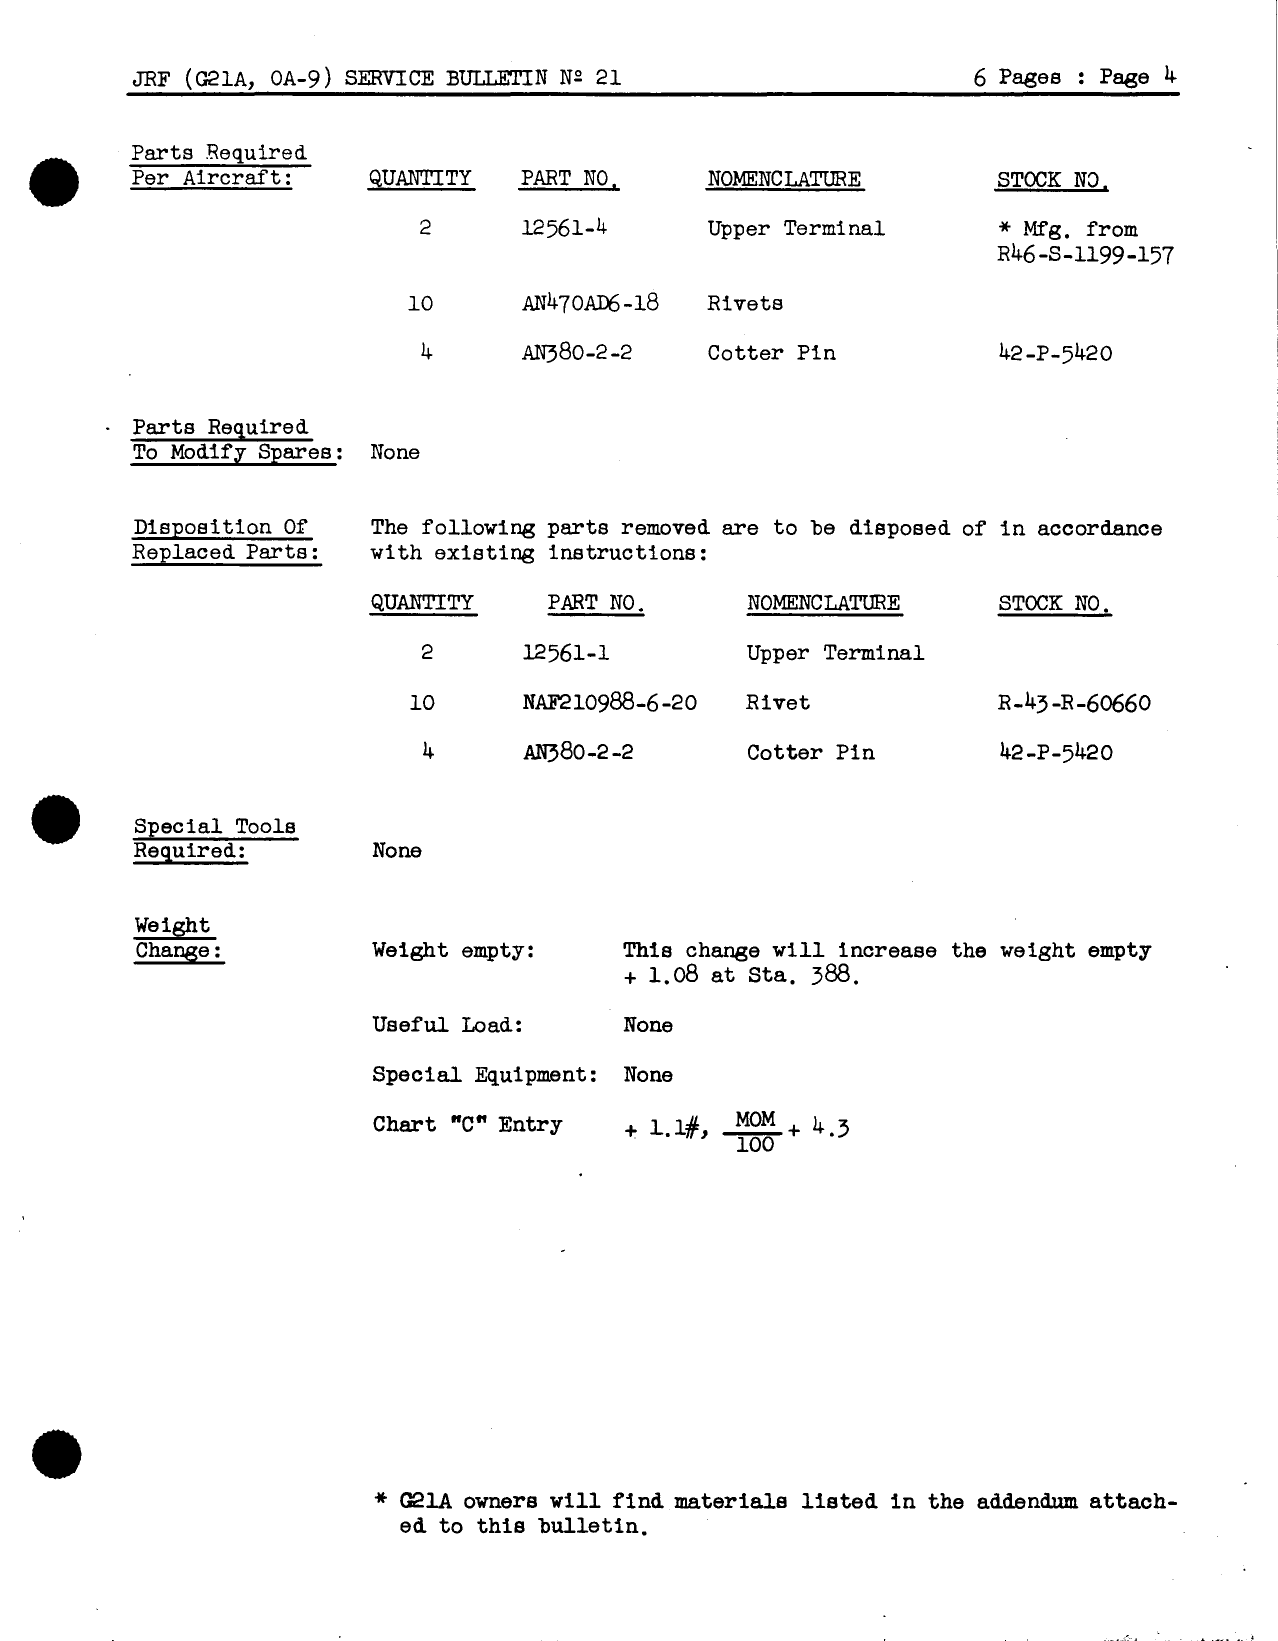 Sample page 5 from AirCorps Library document: Inspection and Replacement of Tail Upper Terminal Stabilizer Struts for Model JRF, G-21A, and OA-9